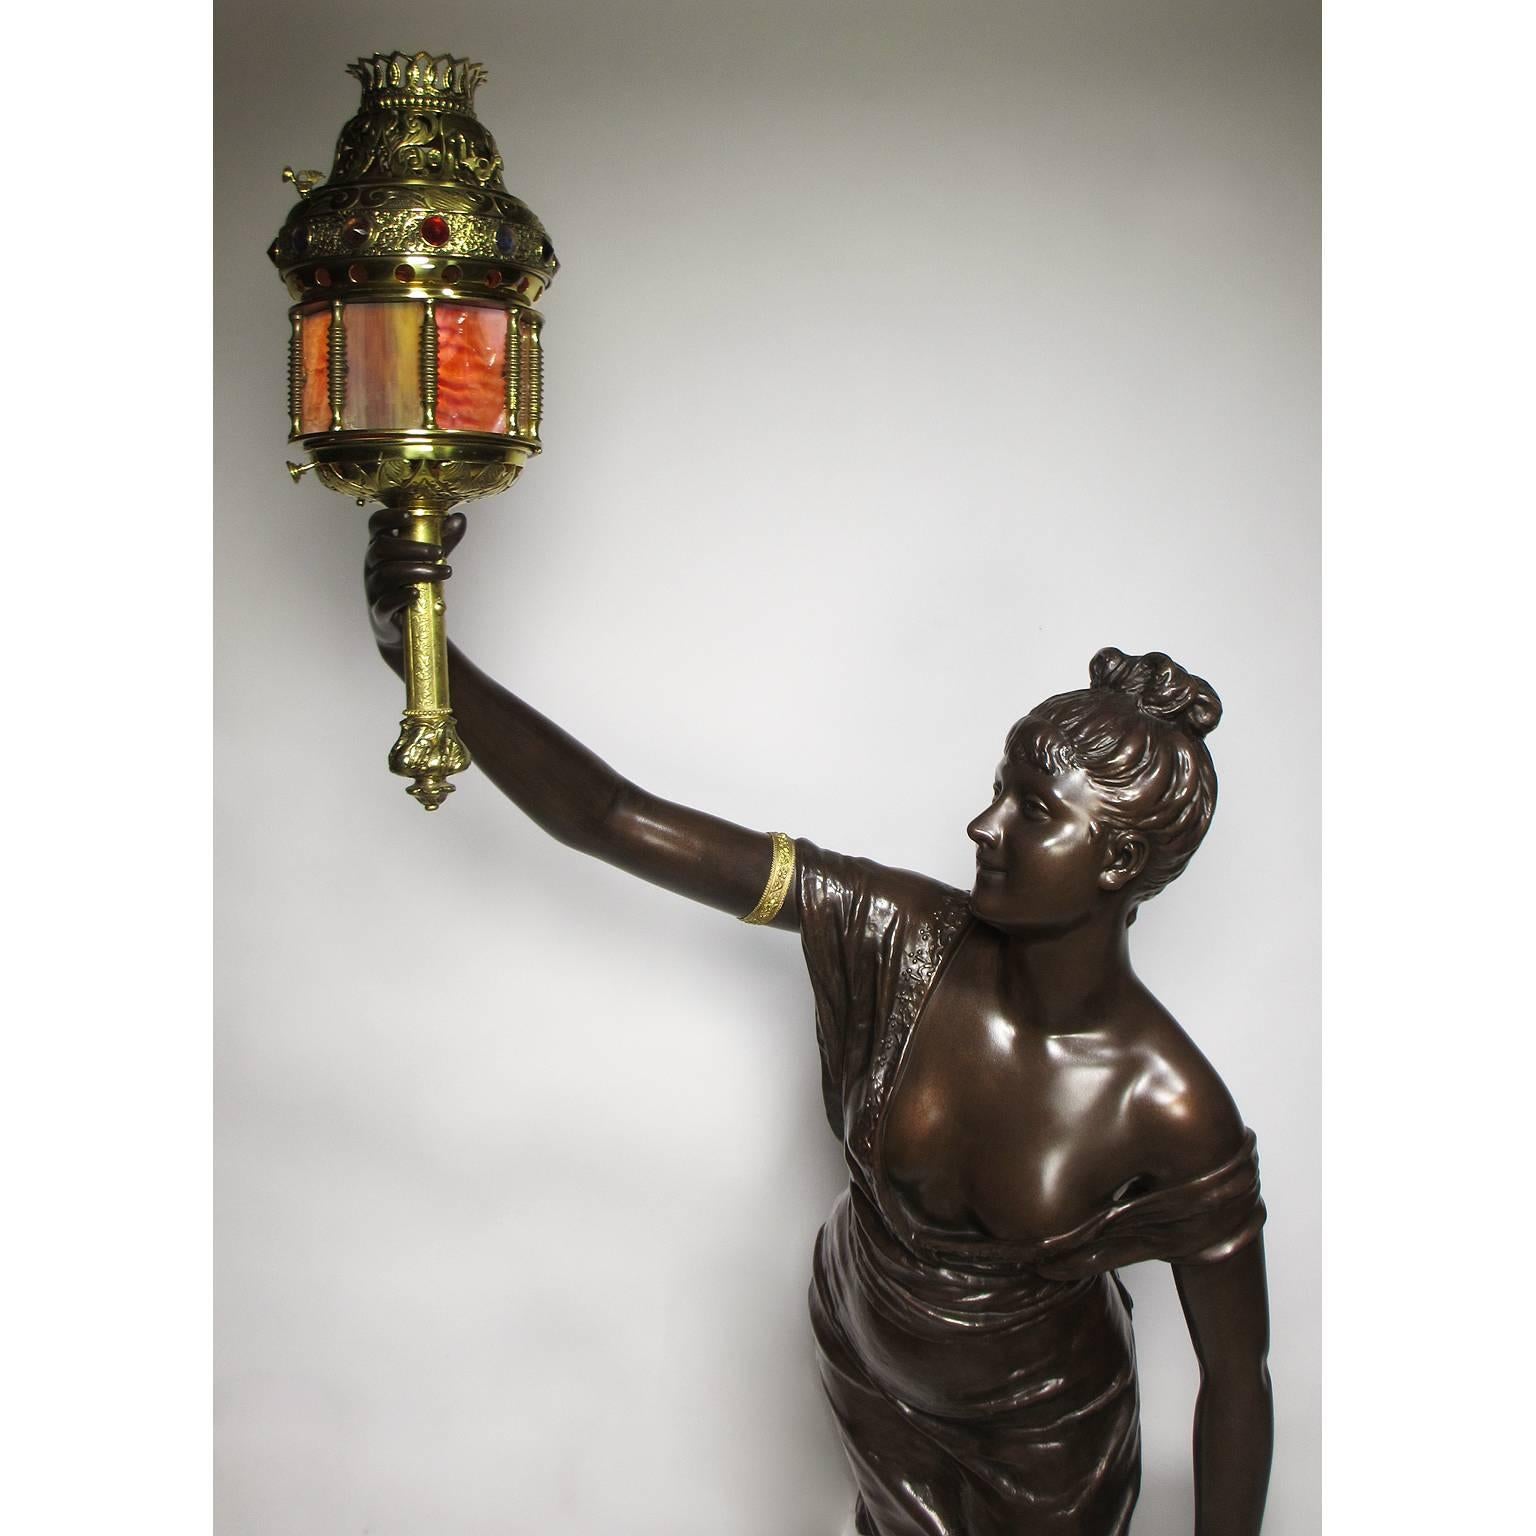 Belle Époque Lifesize French 19th Century Sculpture of a Lady with a Lantern, by Louis Hottot For Sale